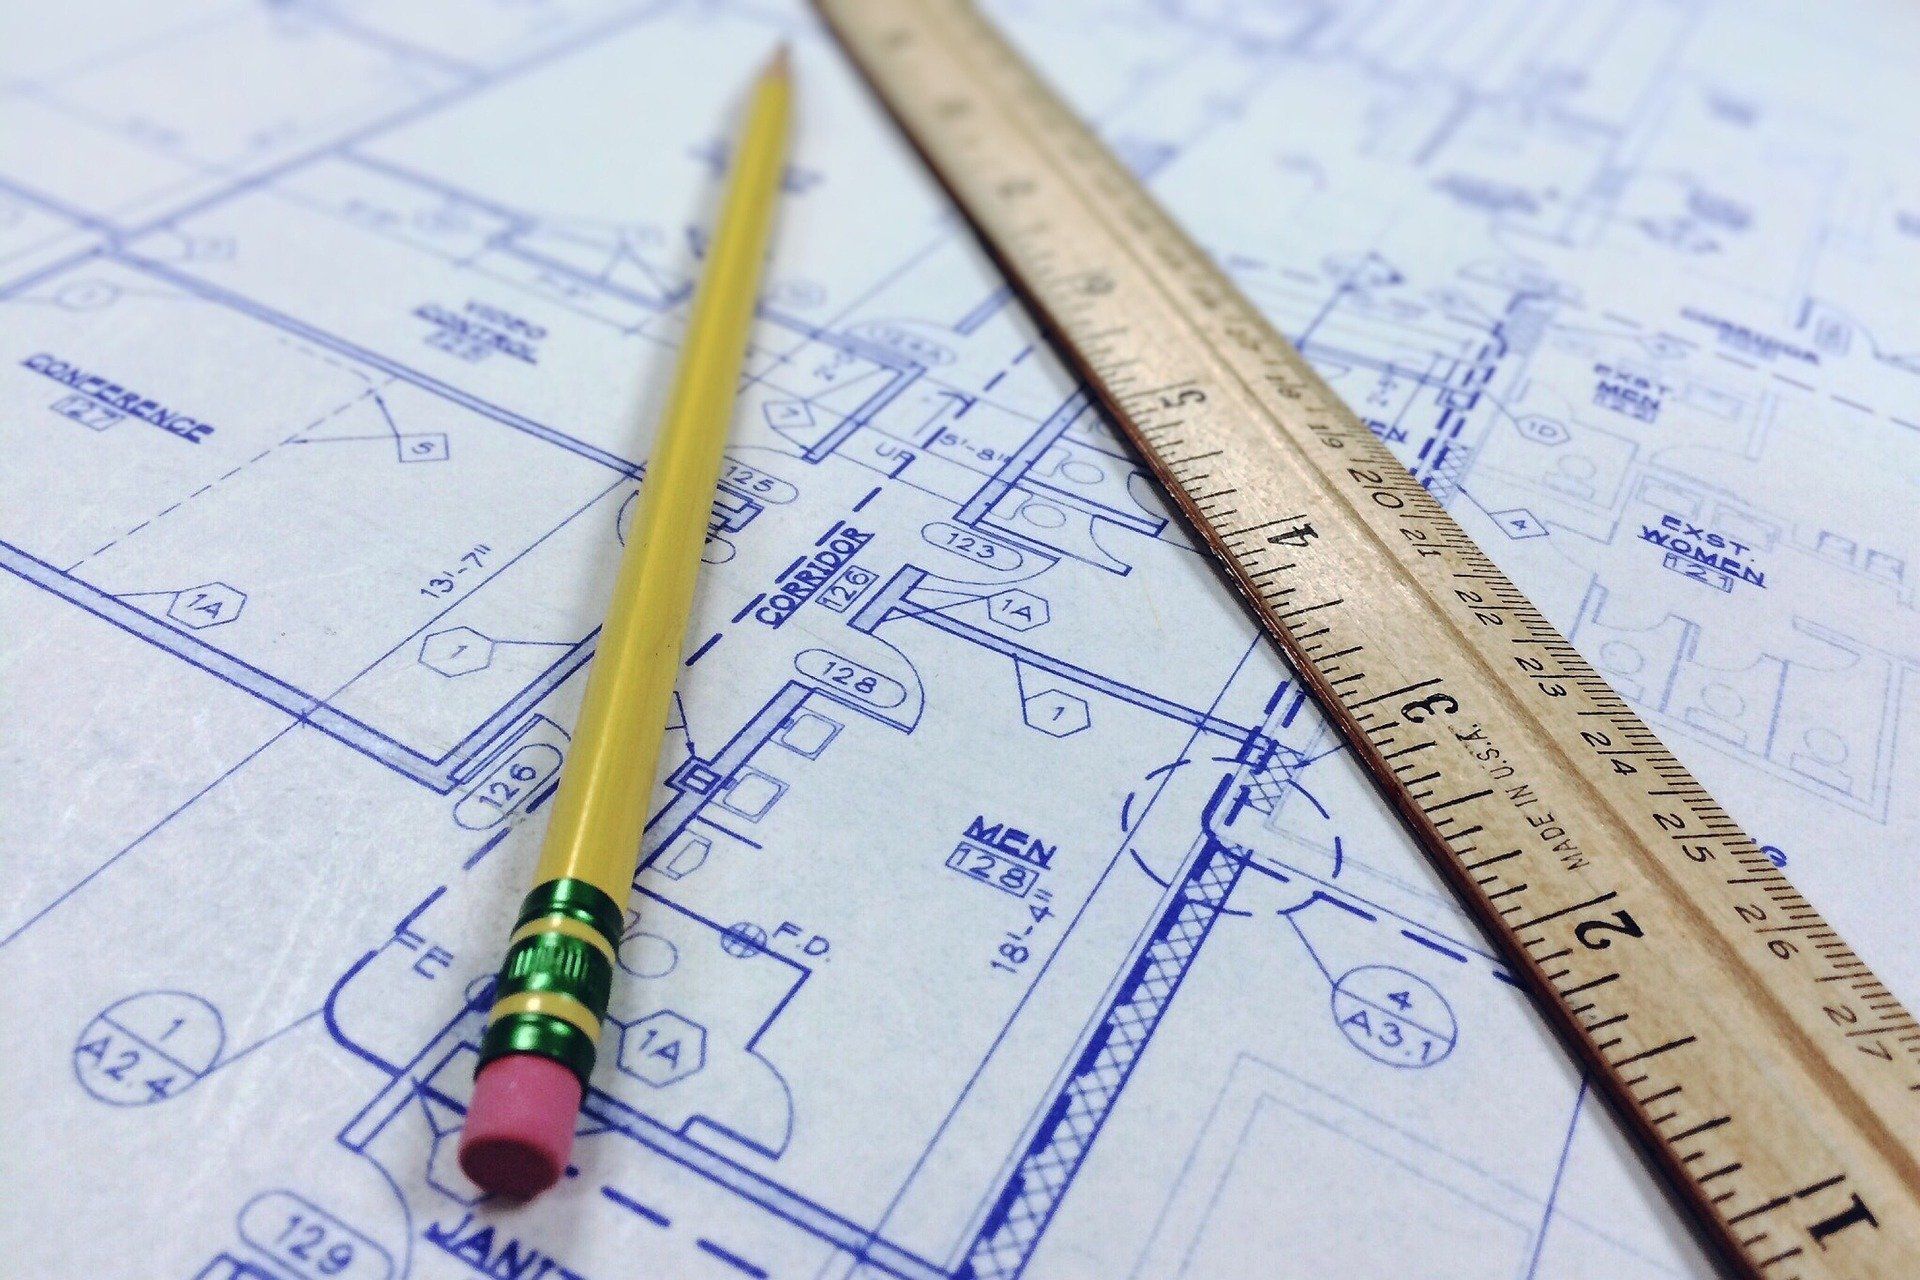 blueprints with a wooden pencil and wooden ruler on top.